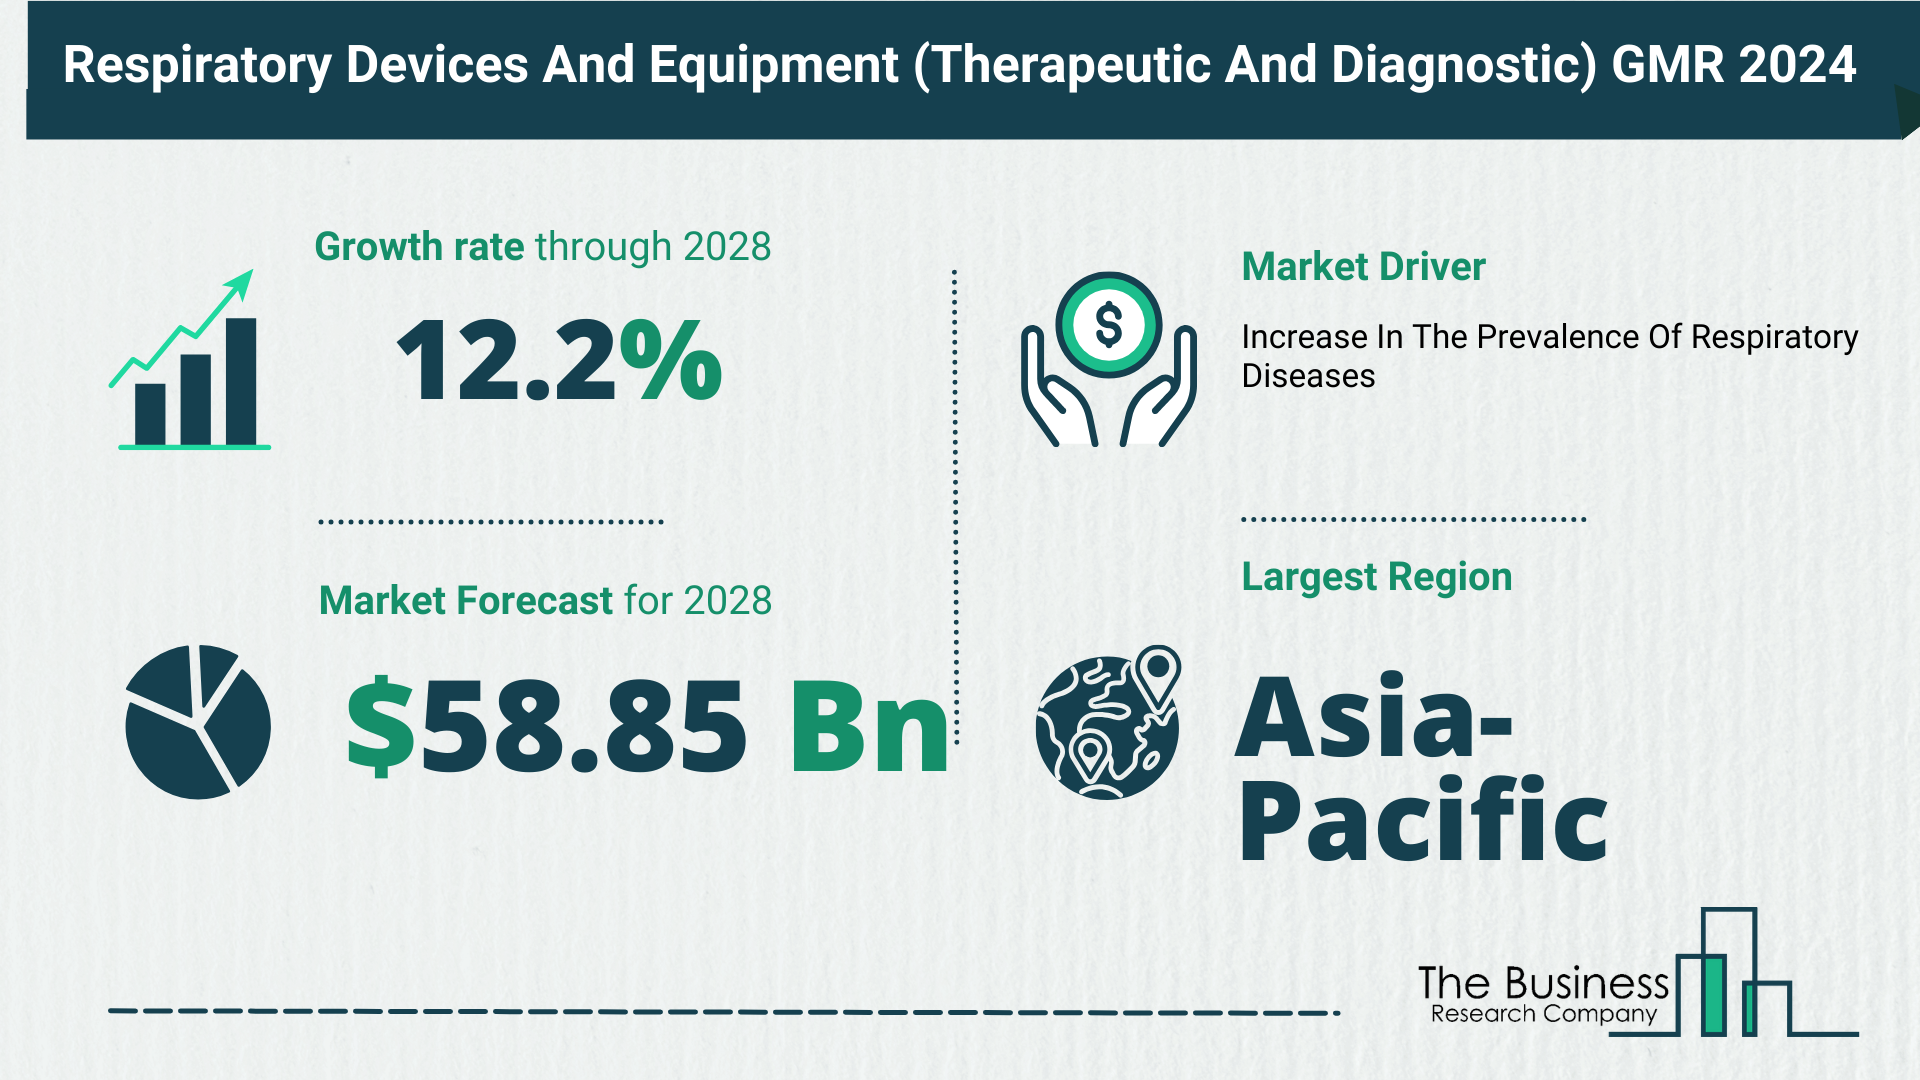 Respiratory Devices And Equipment (Therapeutic And Diagnostic) Market Growth Analysis Till 2033 By The Business Research Company